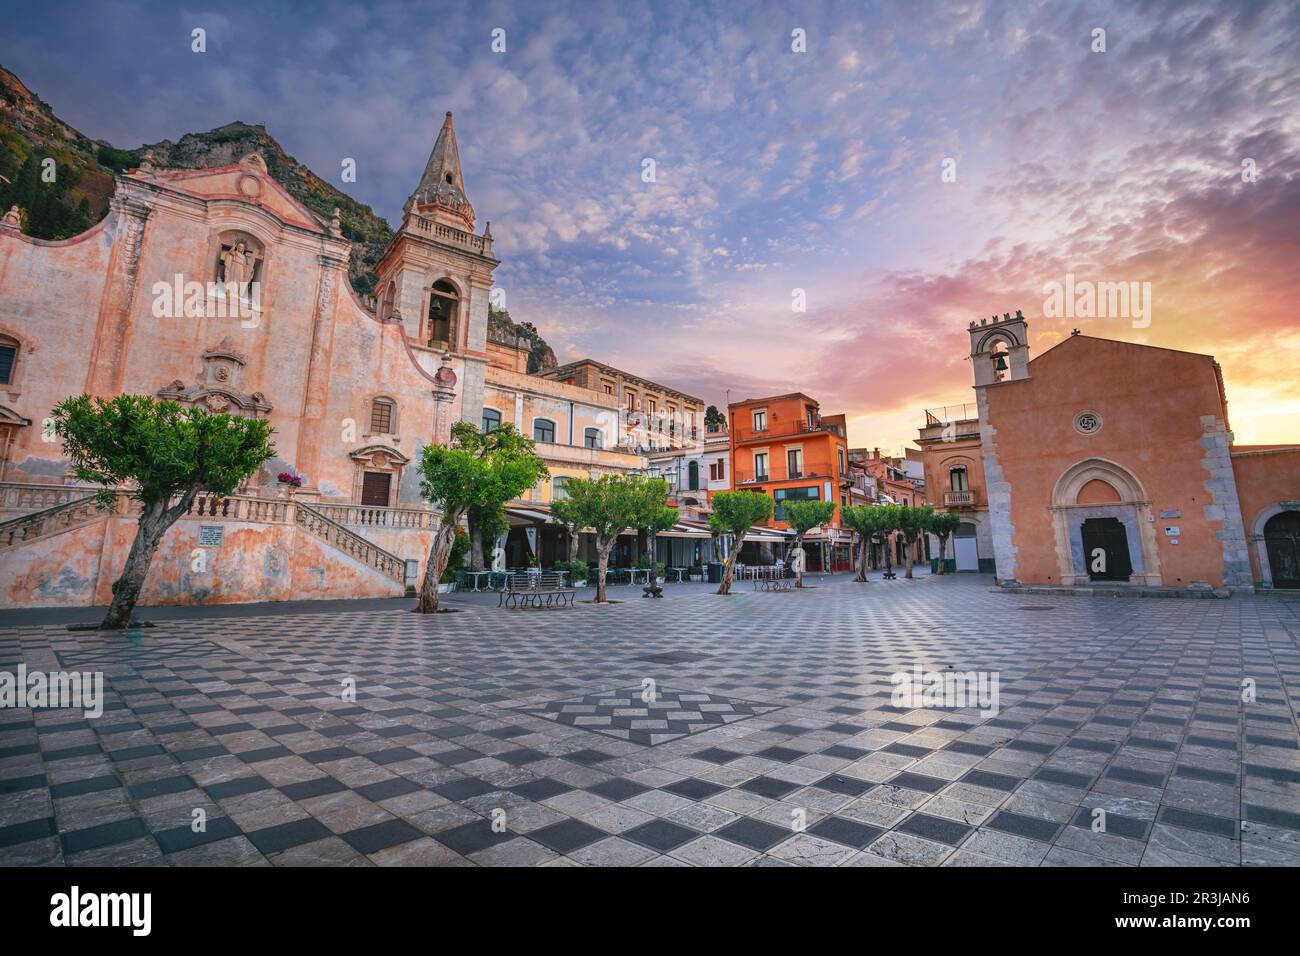 Taormina, Sicily, Italy. Cityscape image of picturesque town of Taormina, Sicily with main square Piazza IX Aprile and San Giuseppe church at sunrise. Stock Photo